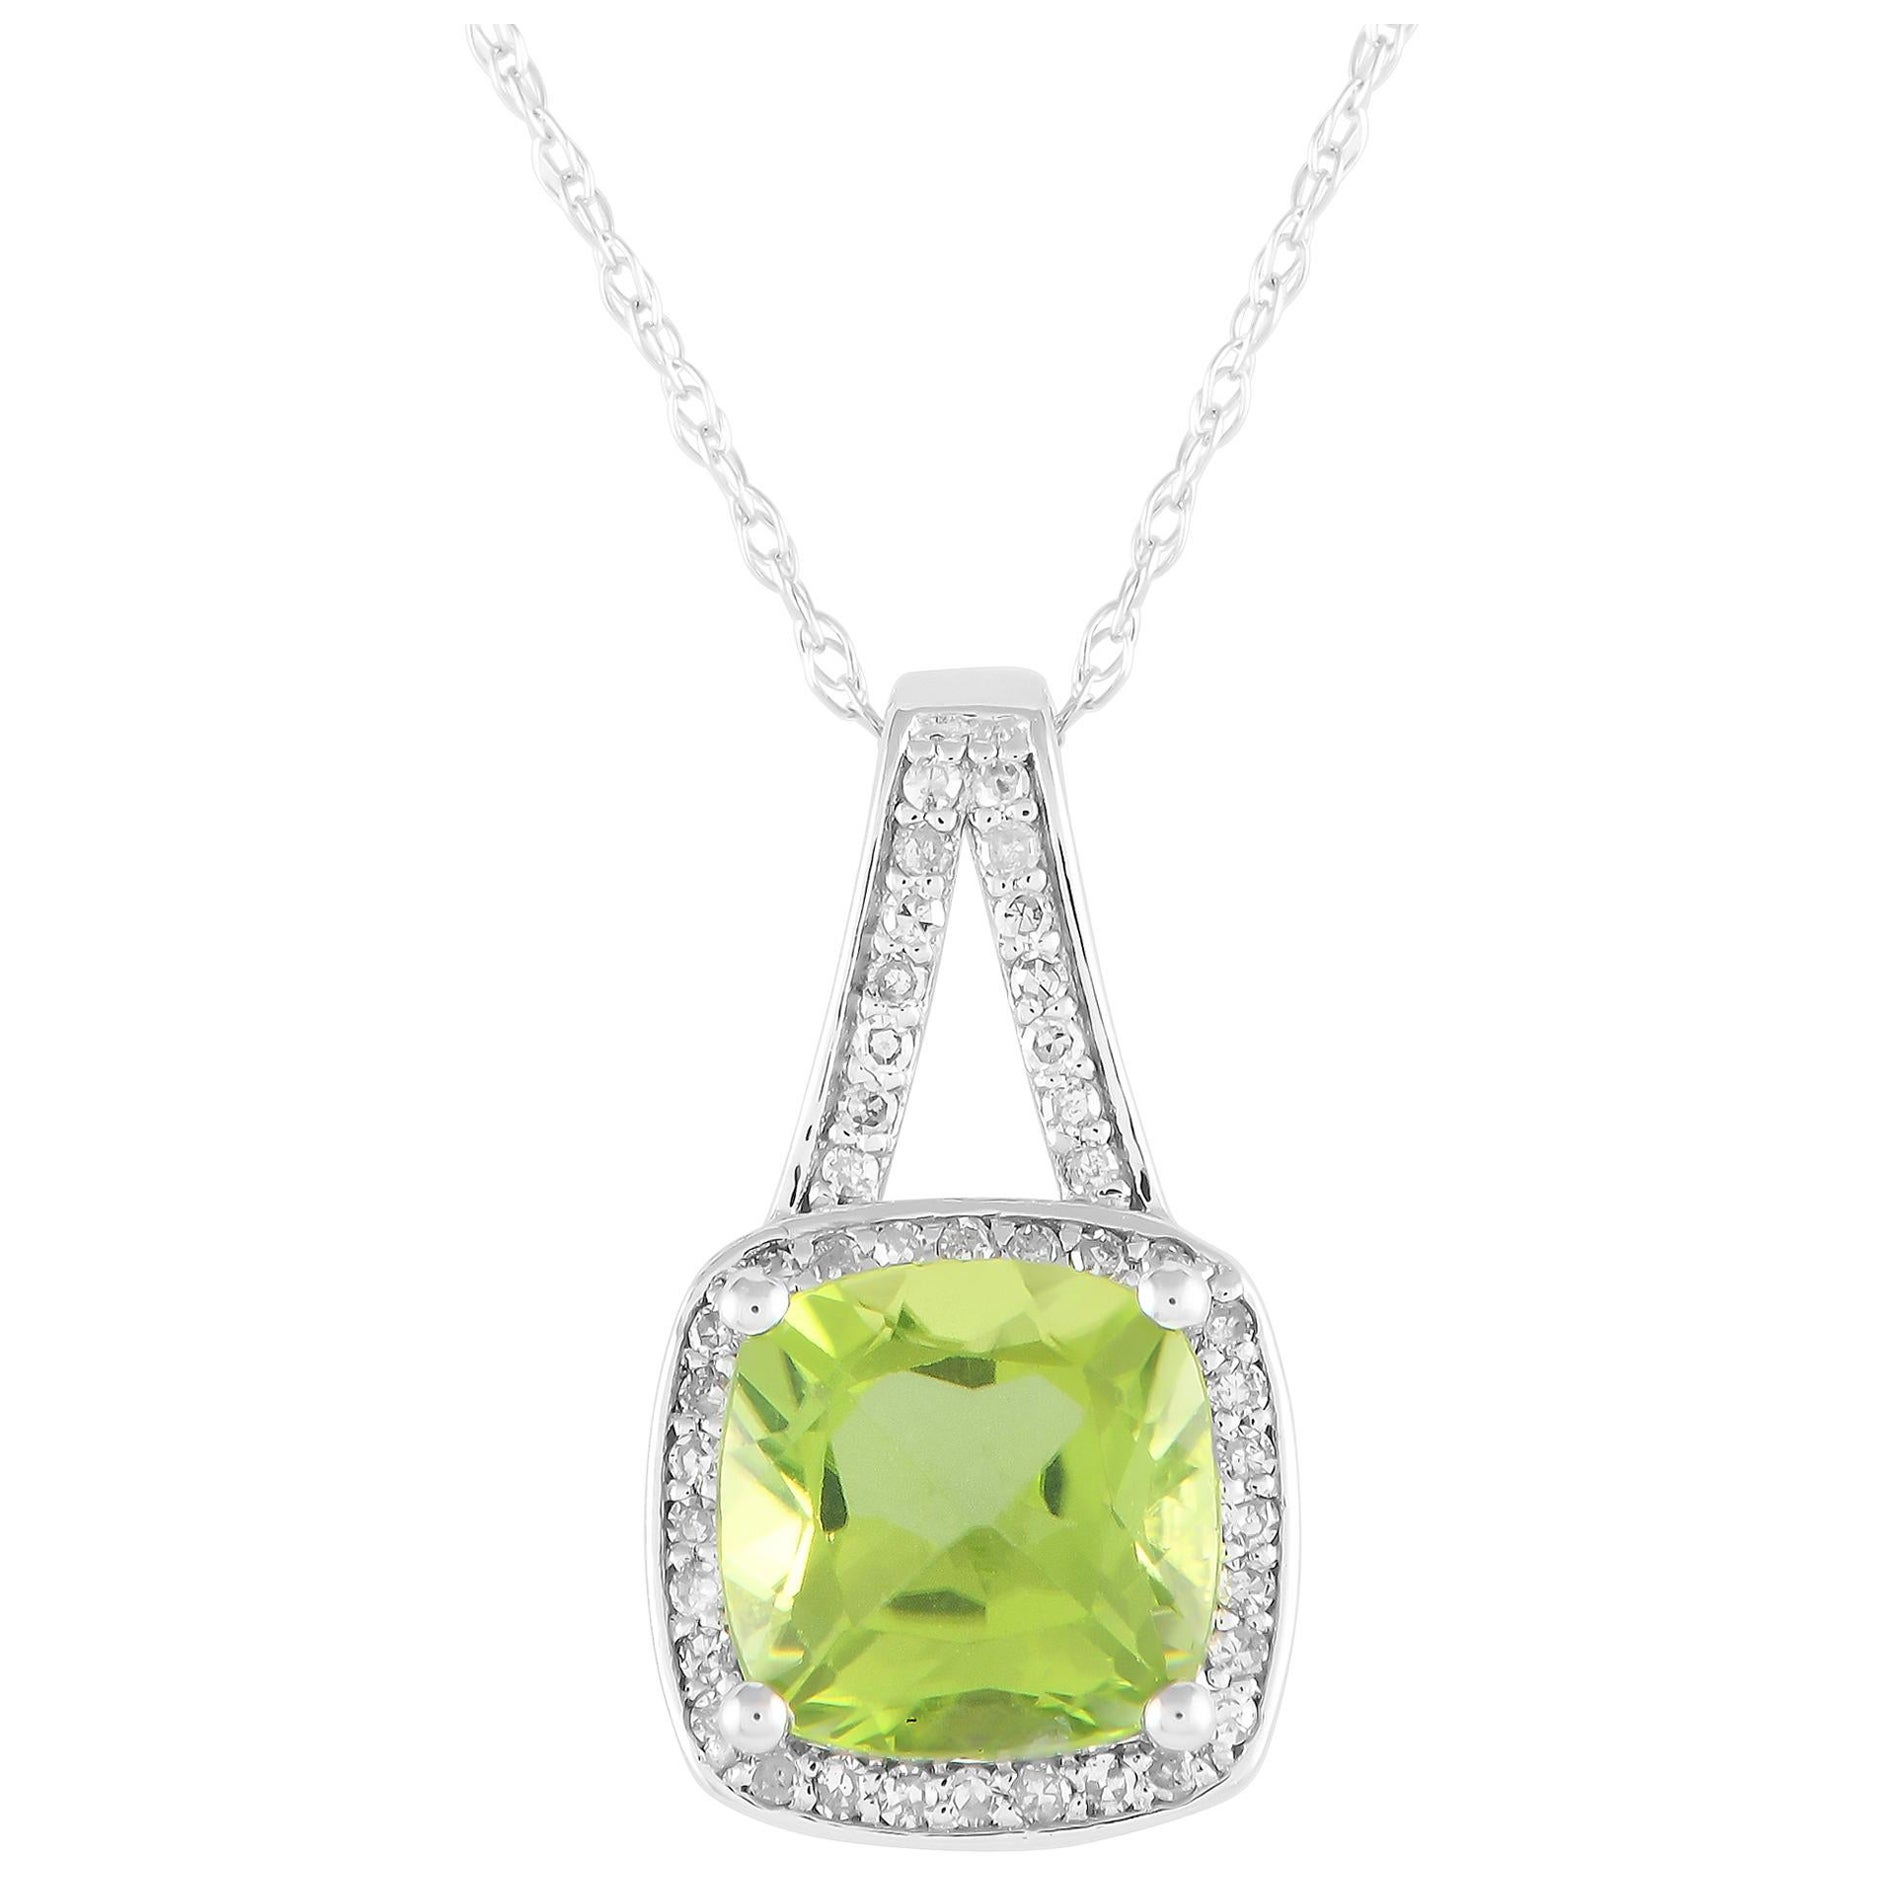 LB Exclusive 14K White Gold 0.12ct Diamond and Peridot Necklace PD4-16273WPE For Sale